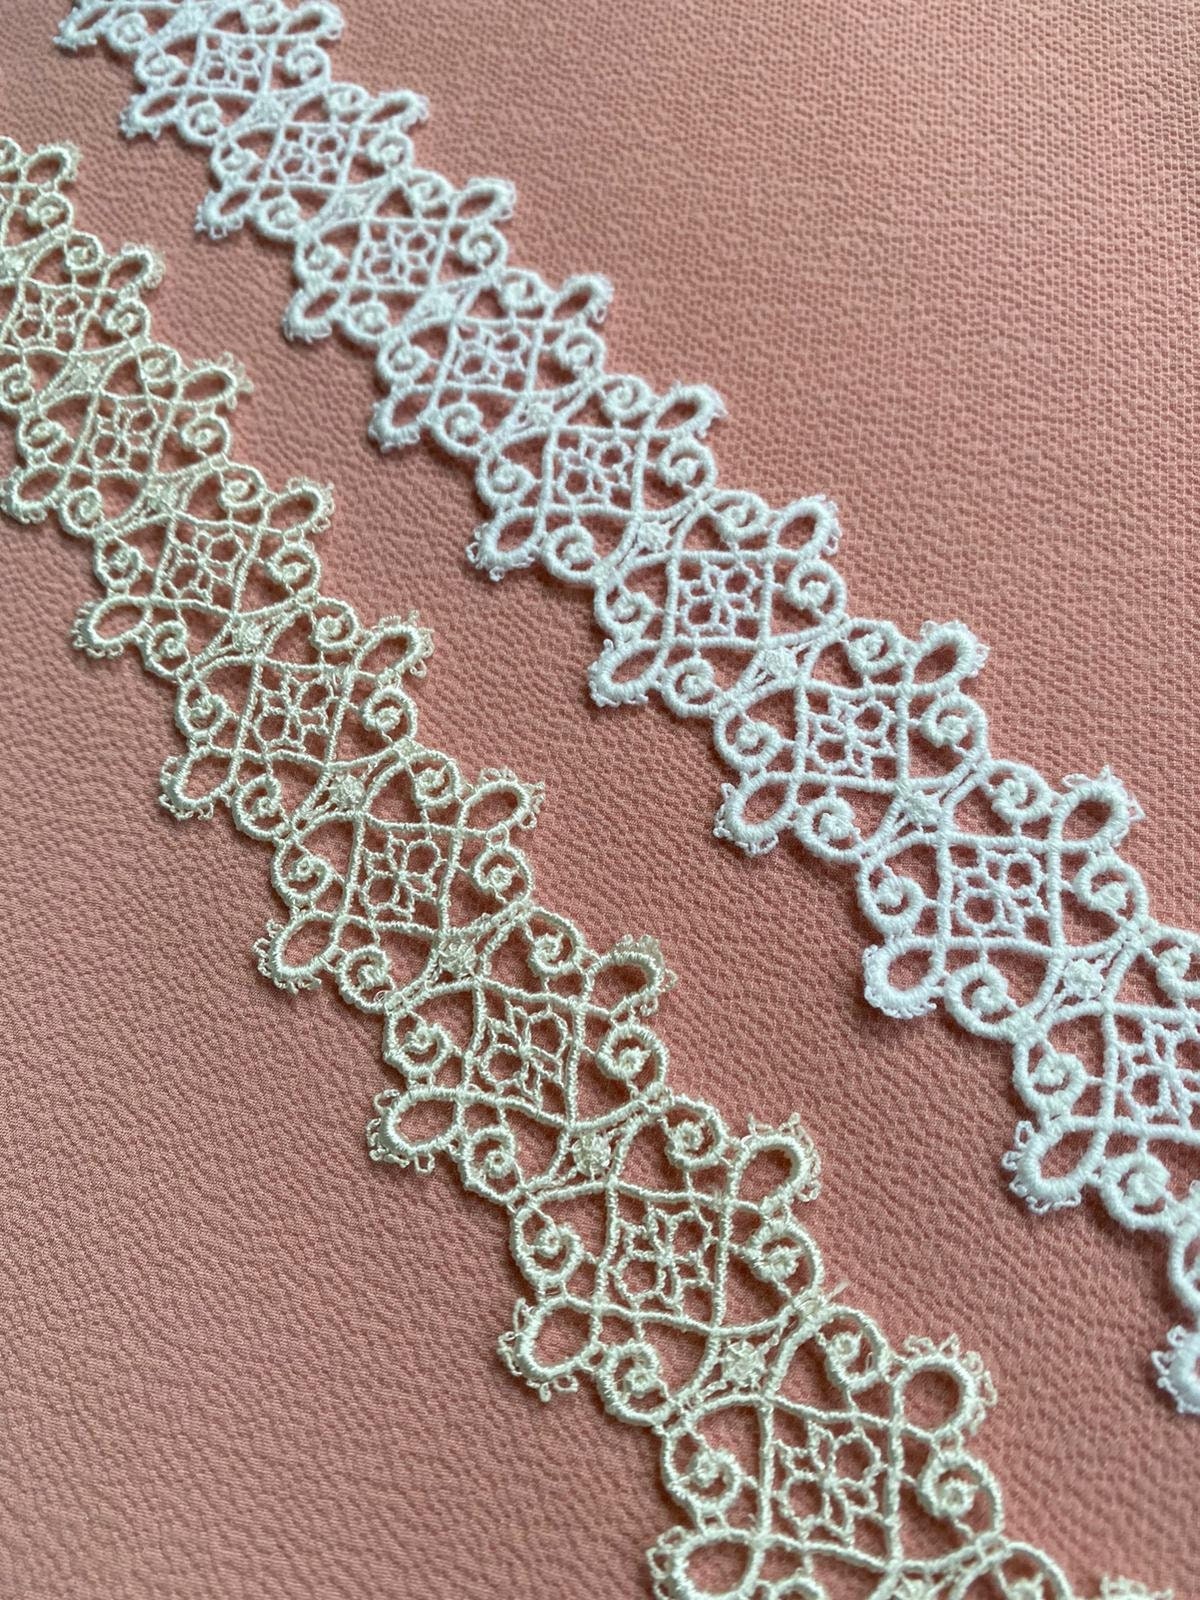 Chemical Lace Guipure Lace White Ivory Floral Scalloped Edge Polyester Venice Lace Trim Beige 1 1 1/4 1 5/16 1 7/16 Wide